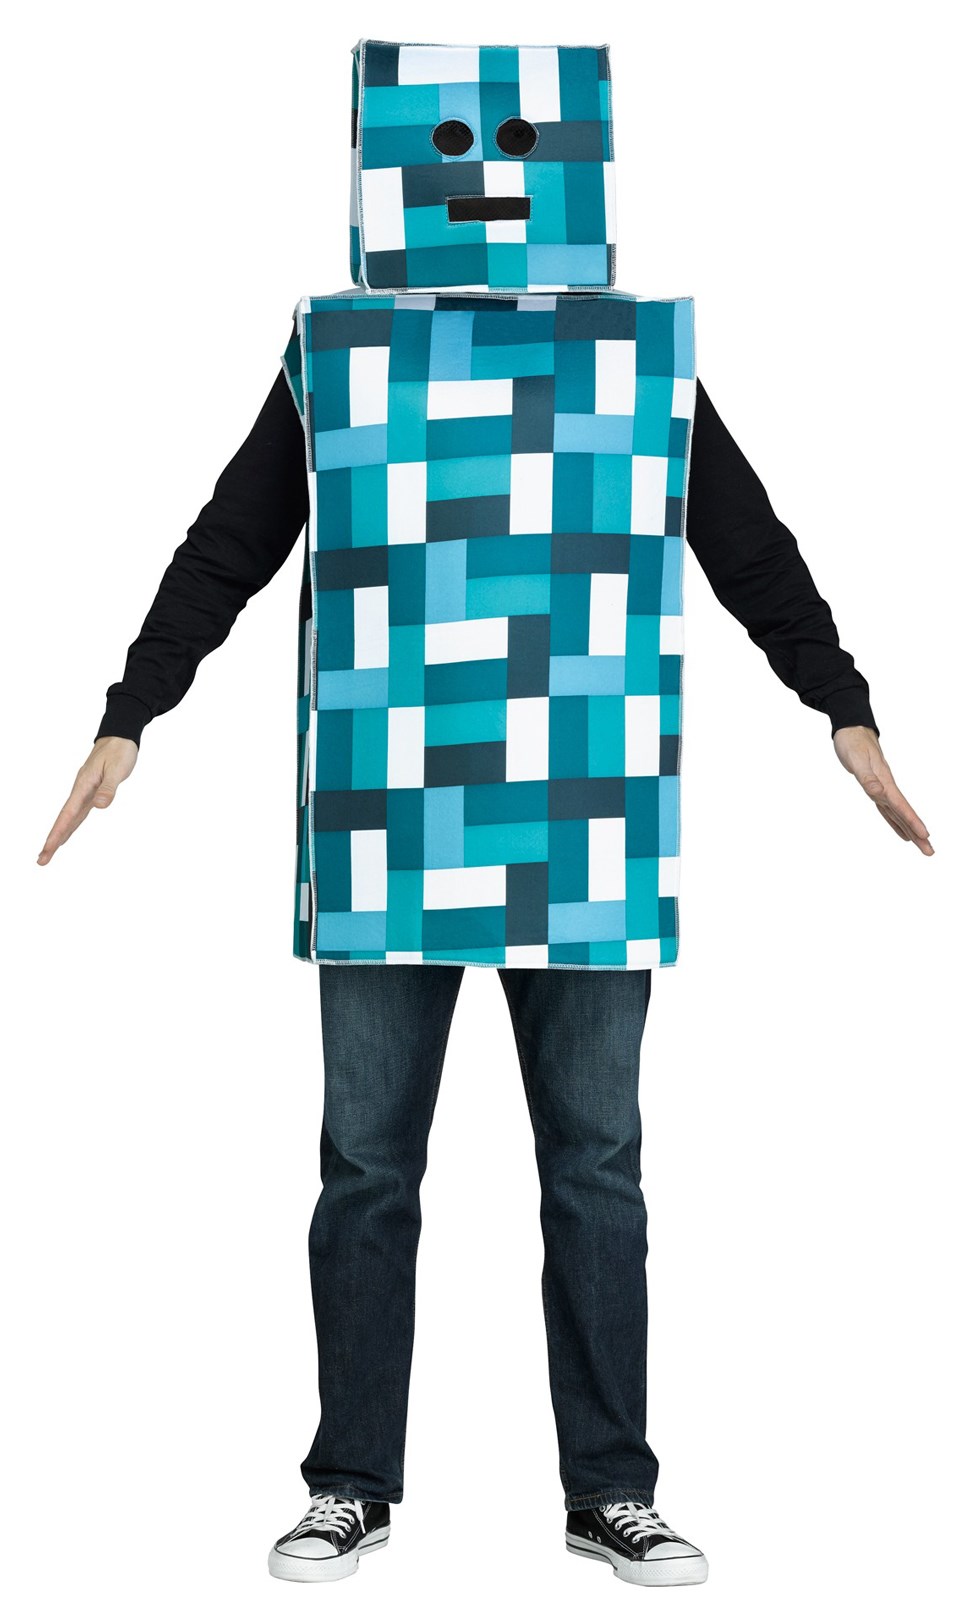 Blue Pixel Robot Costume For Adults